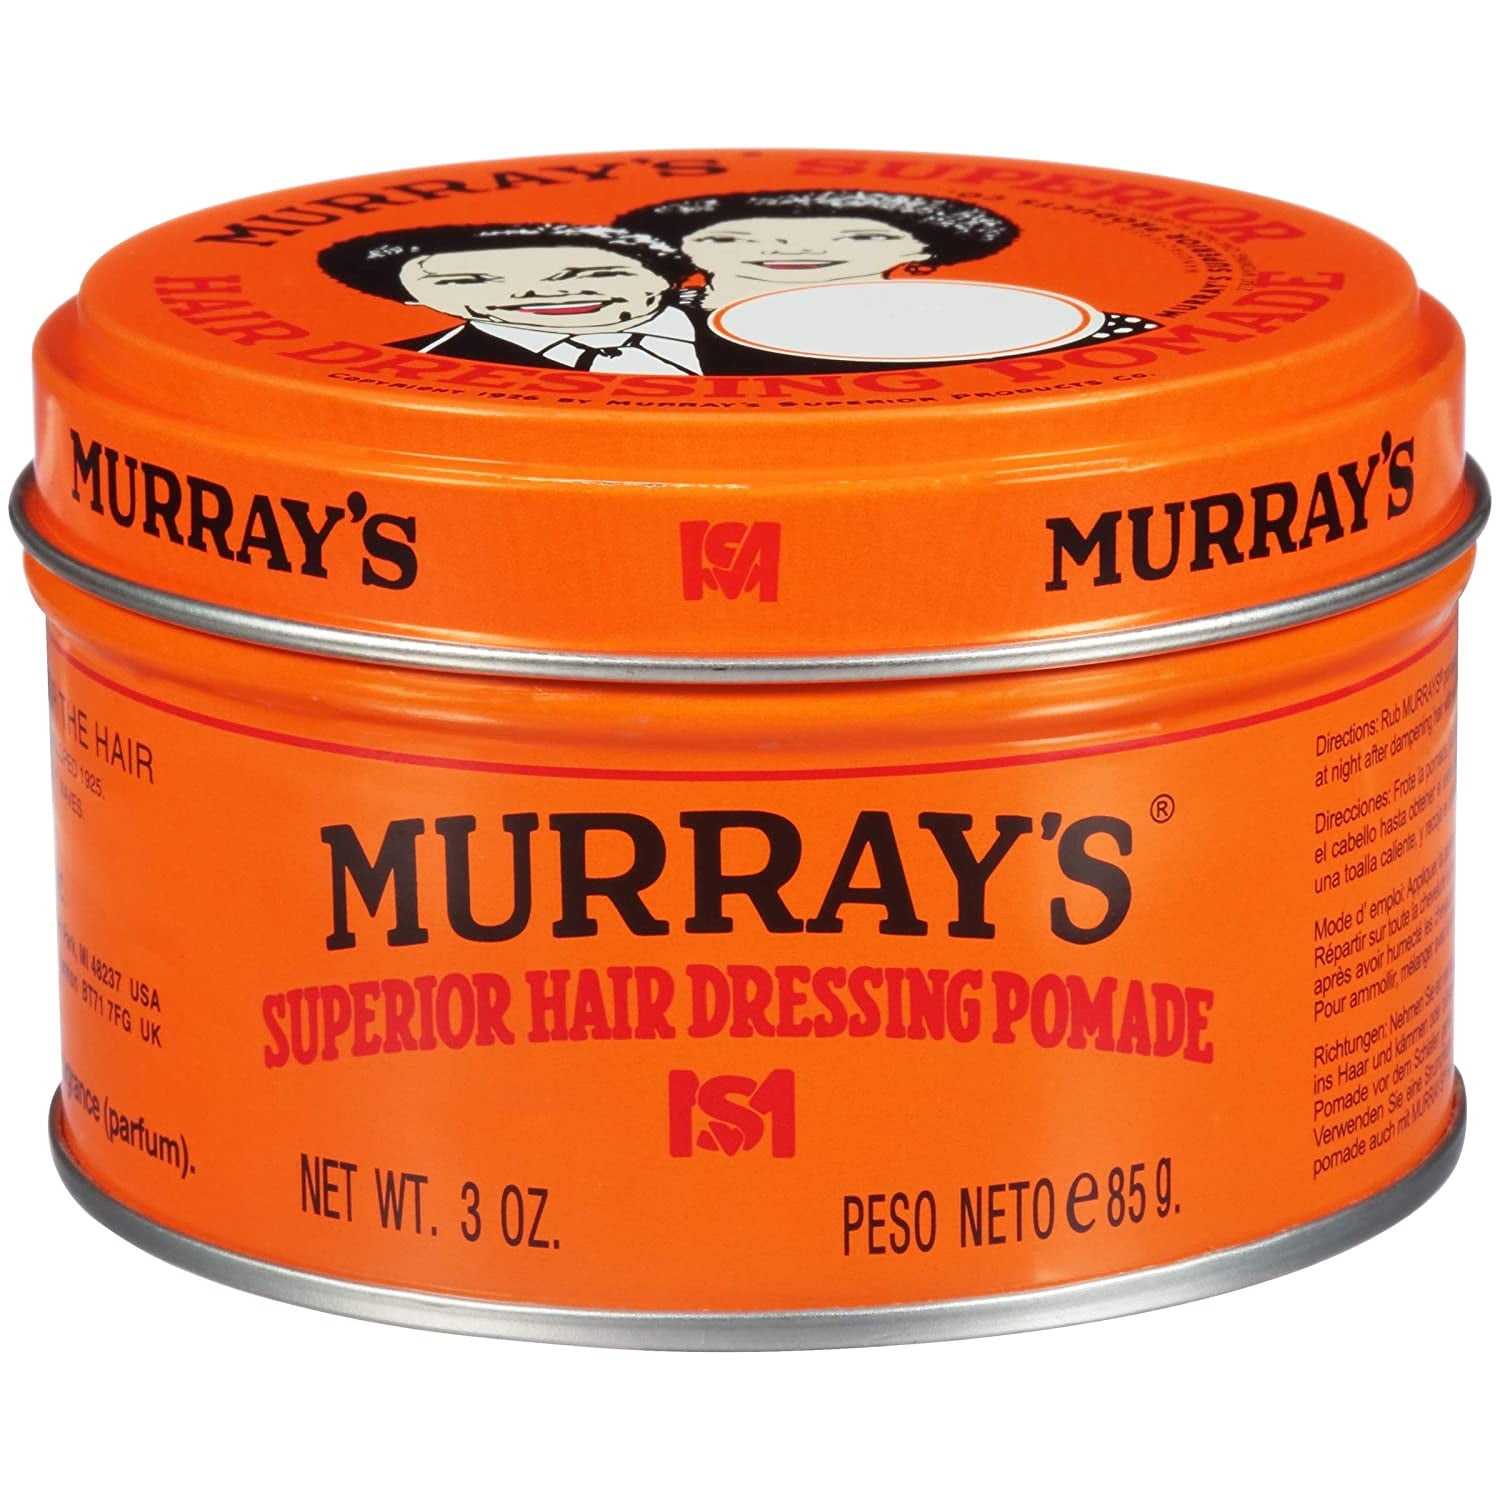 Murray's Superior Hair Dressing Pomade 3 oz. per Jar (2 Pack) : Beauty &  Personal Care 